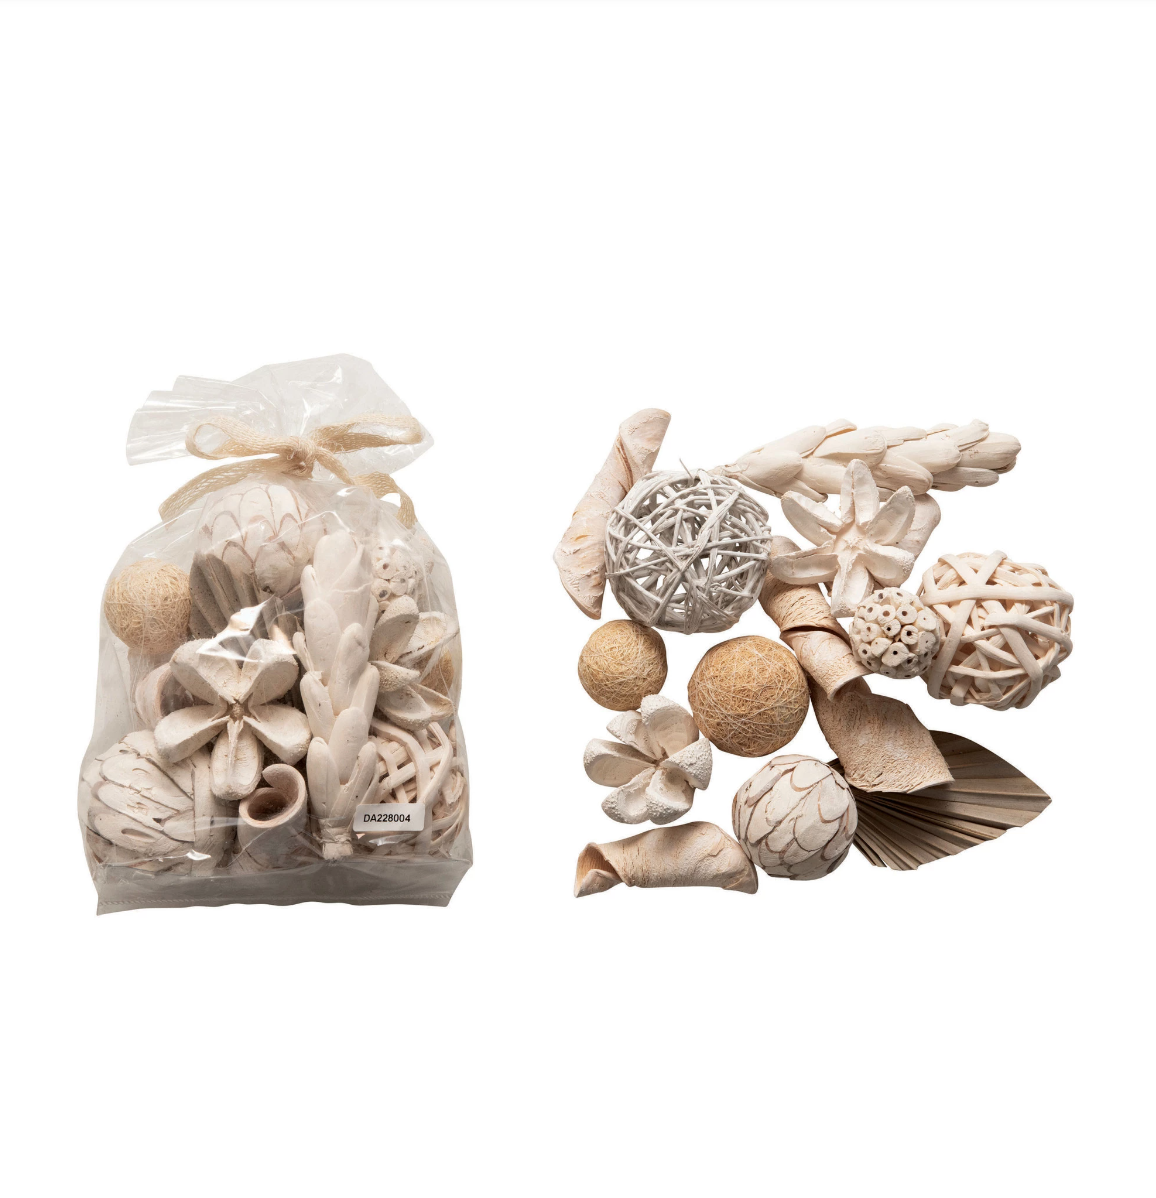 A variety of Creative Co-op Natural Plant Mix decorative objects, including spheres and carved ornaments made from natural materials typical of Scottsdale, Arizona, displayed next to a transparent bag tied with a ribbon, isolated on a white background.